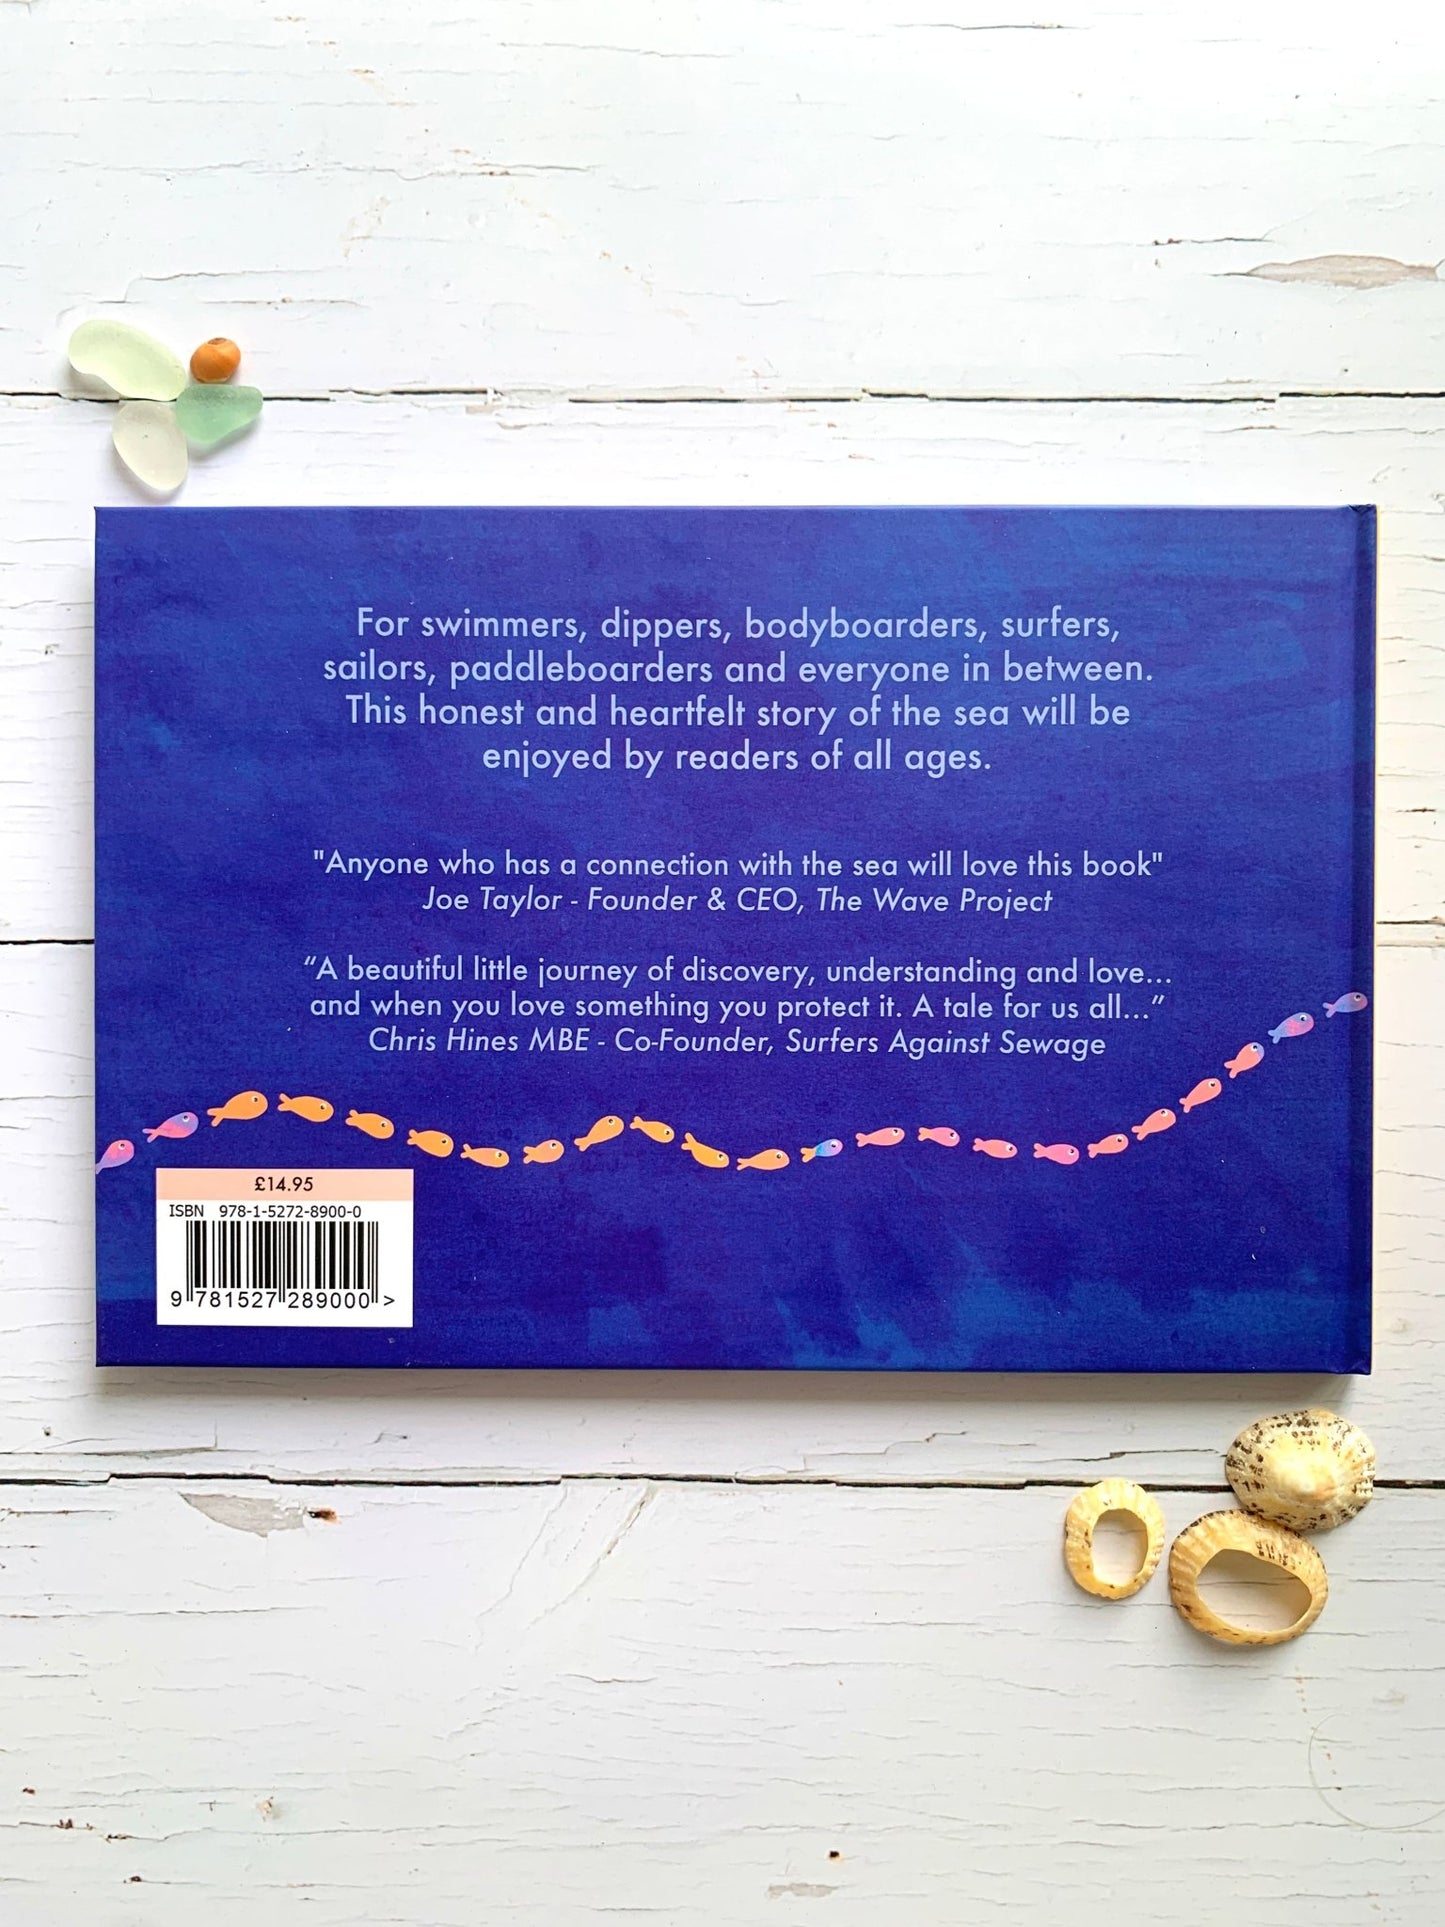 I Spoke to the Sea, an illustrated storybook - Readymoney Beach Shop